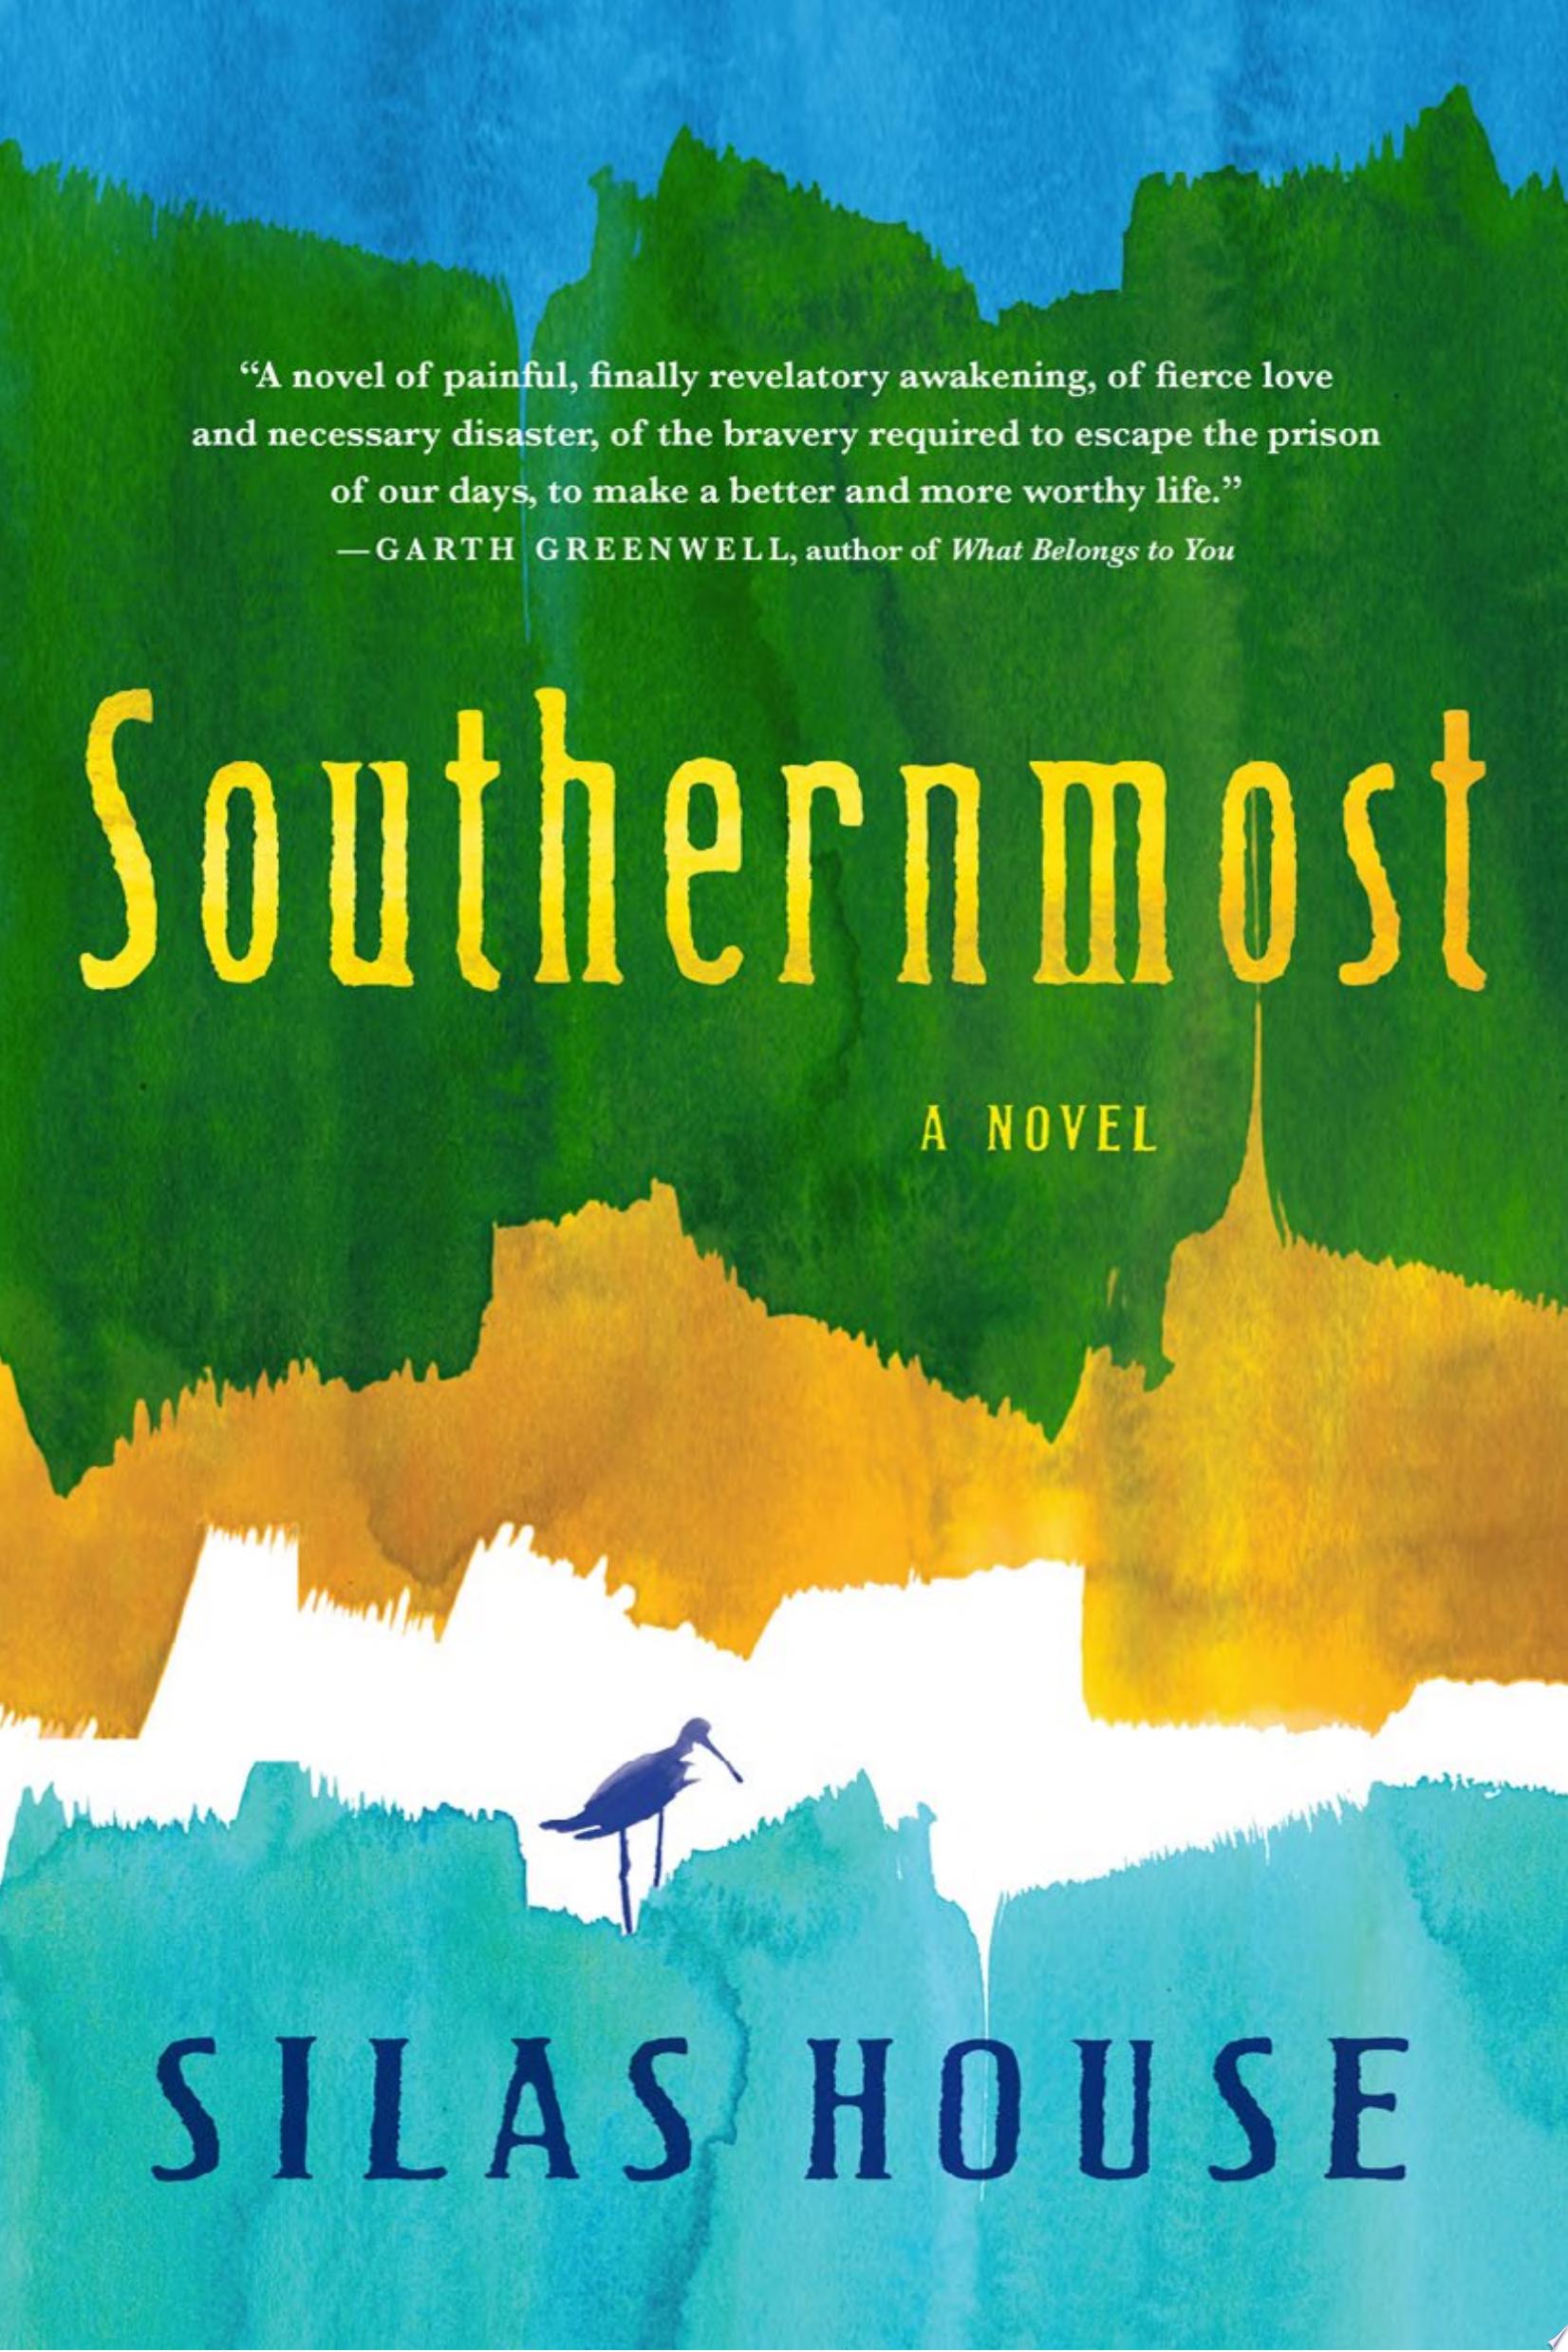 Image for "Southernmost"